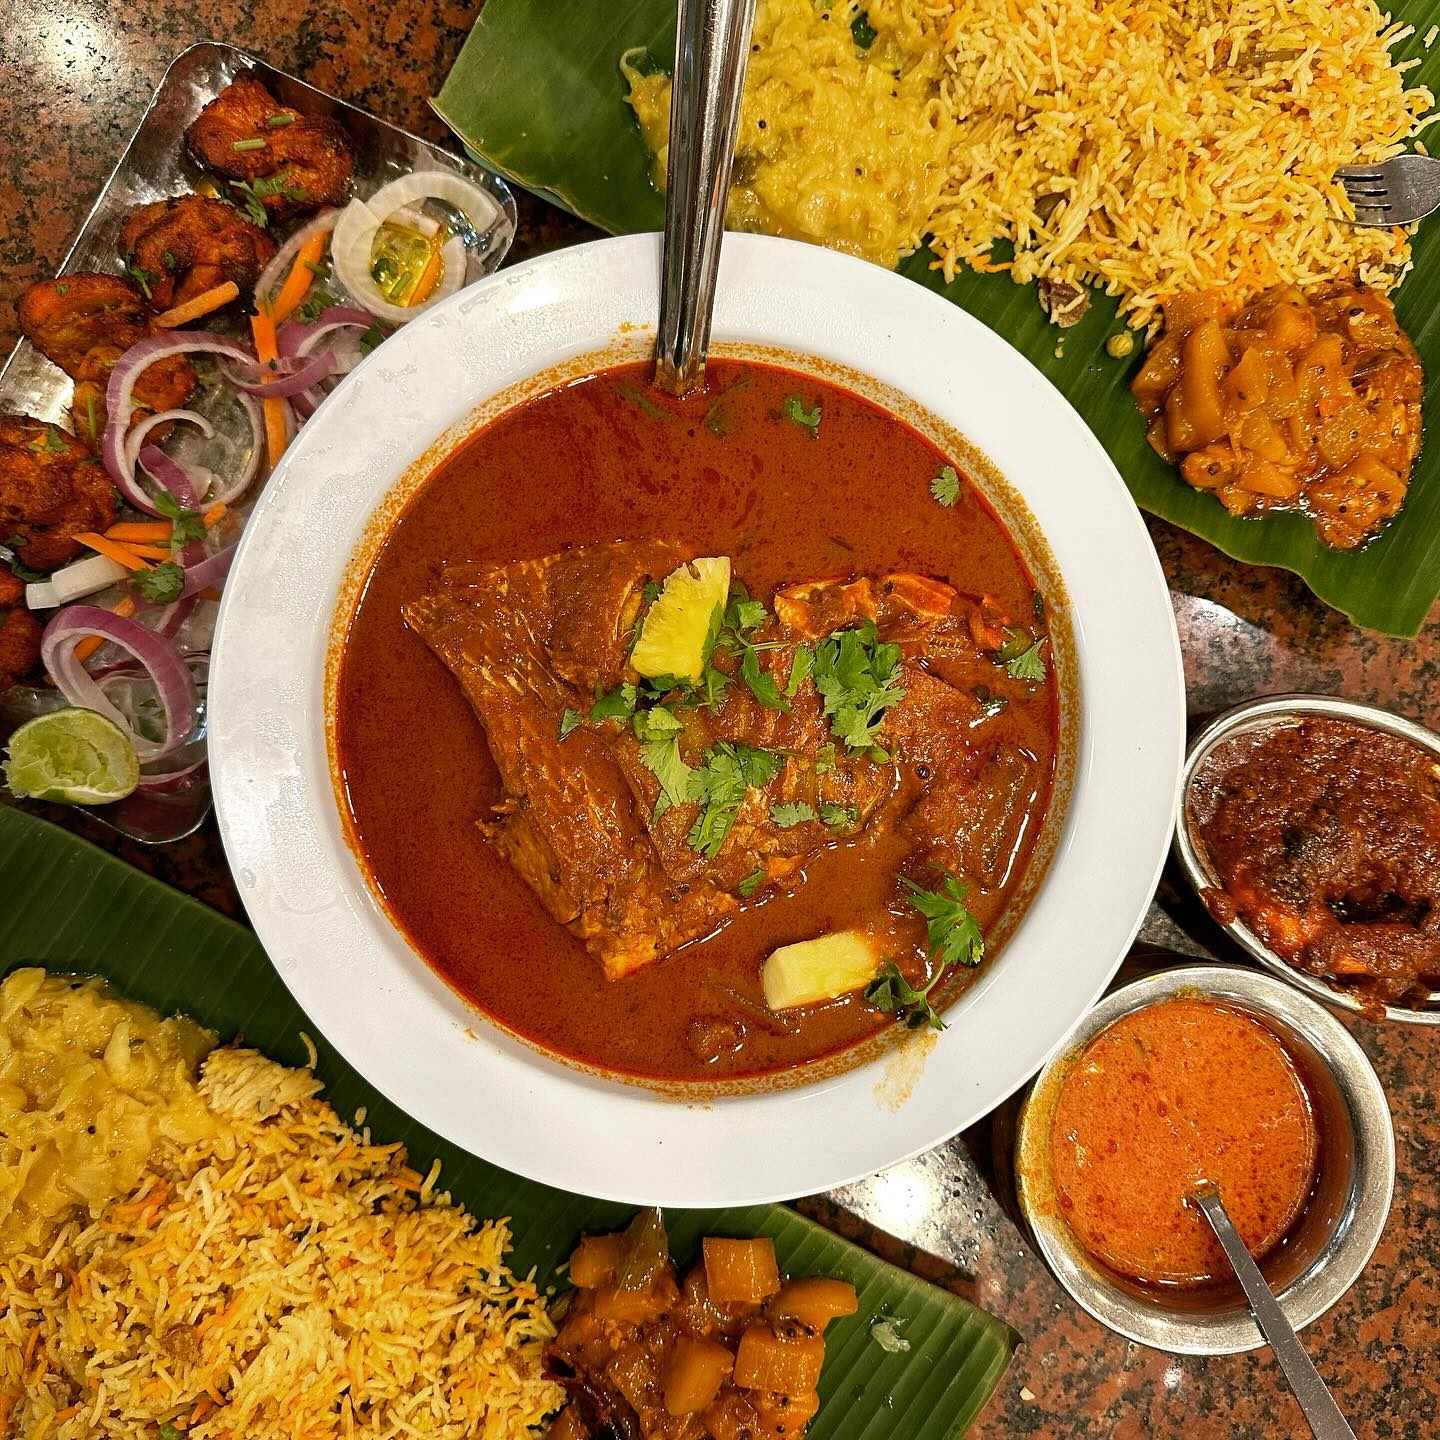 Things to do in Little India - Banana Leaf Apolo